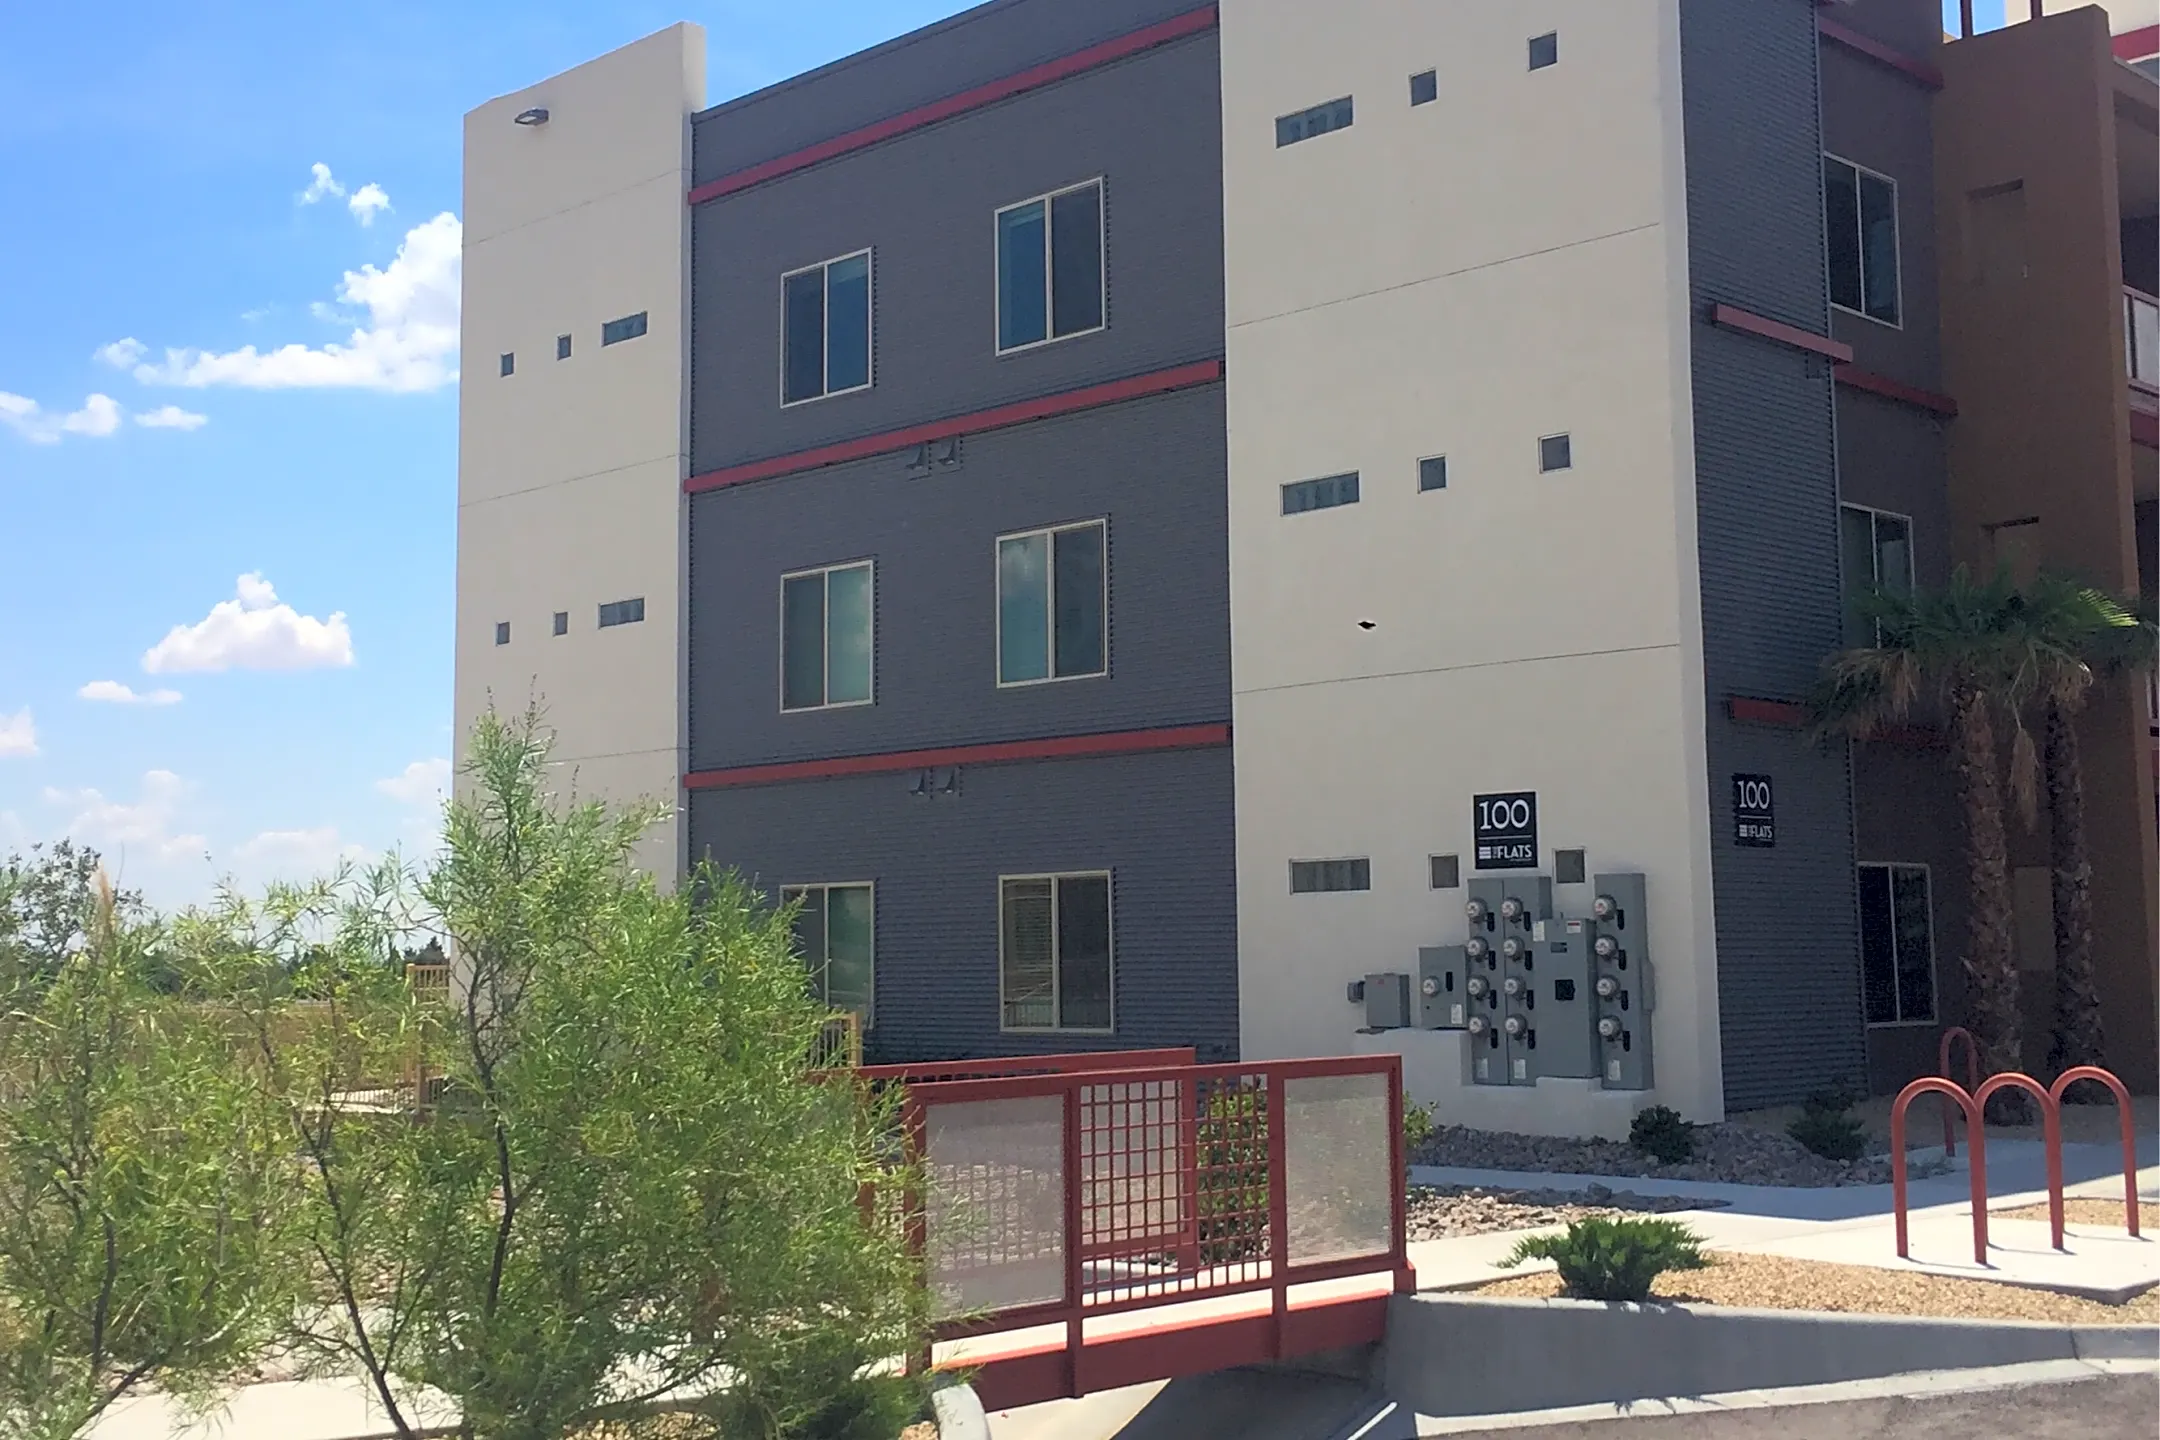 The Flats At Ridgeview 2050 East Wisconsin Avenue Las Cruces Nm Apartments For Rent Rent